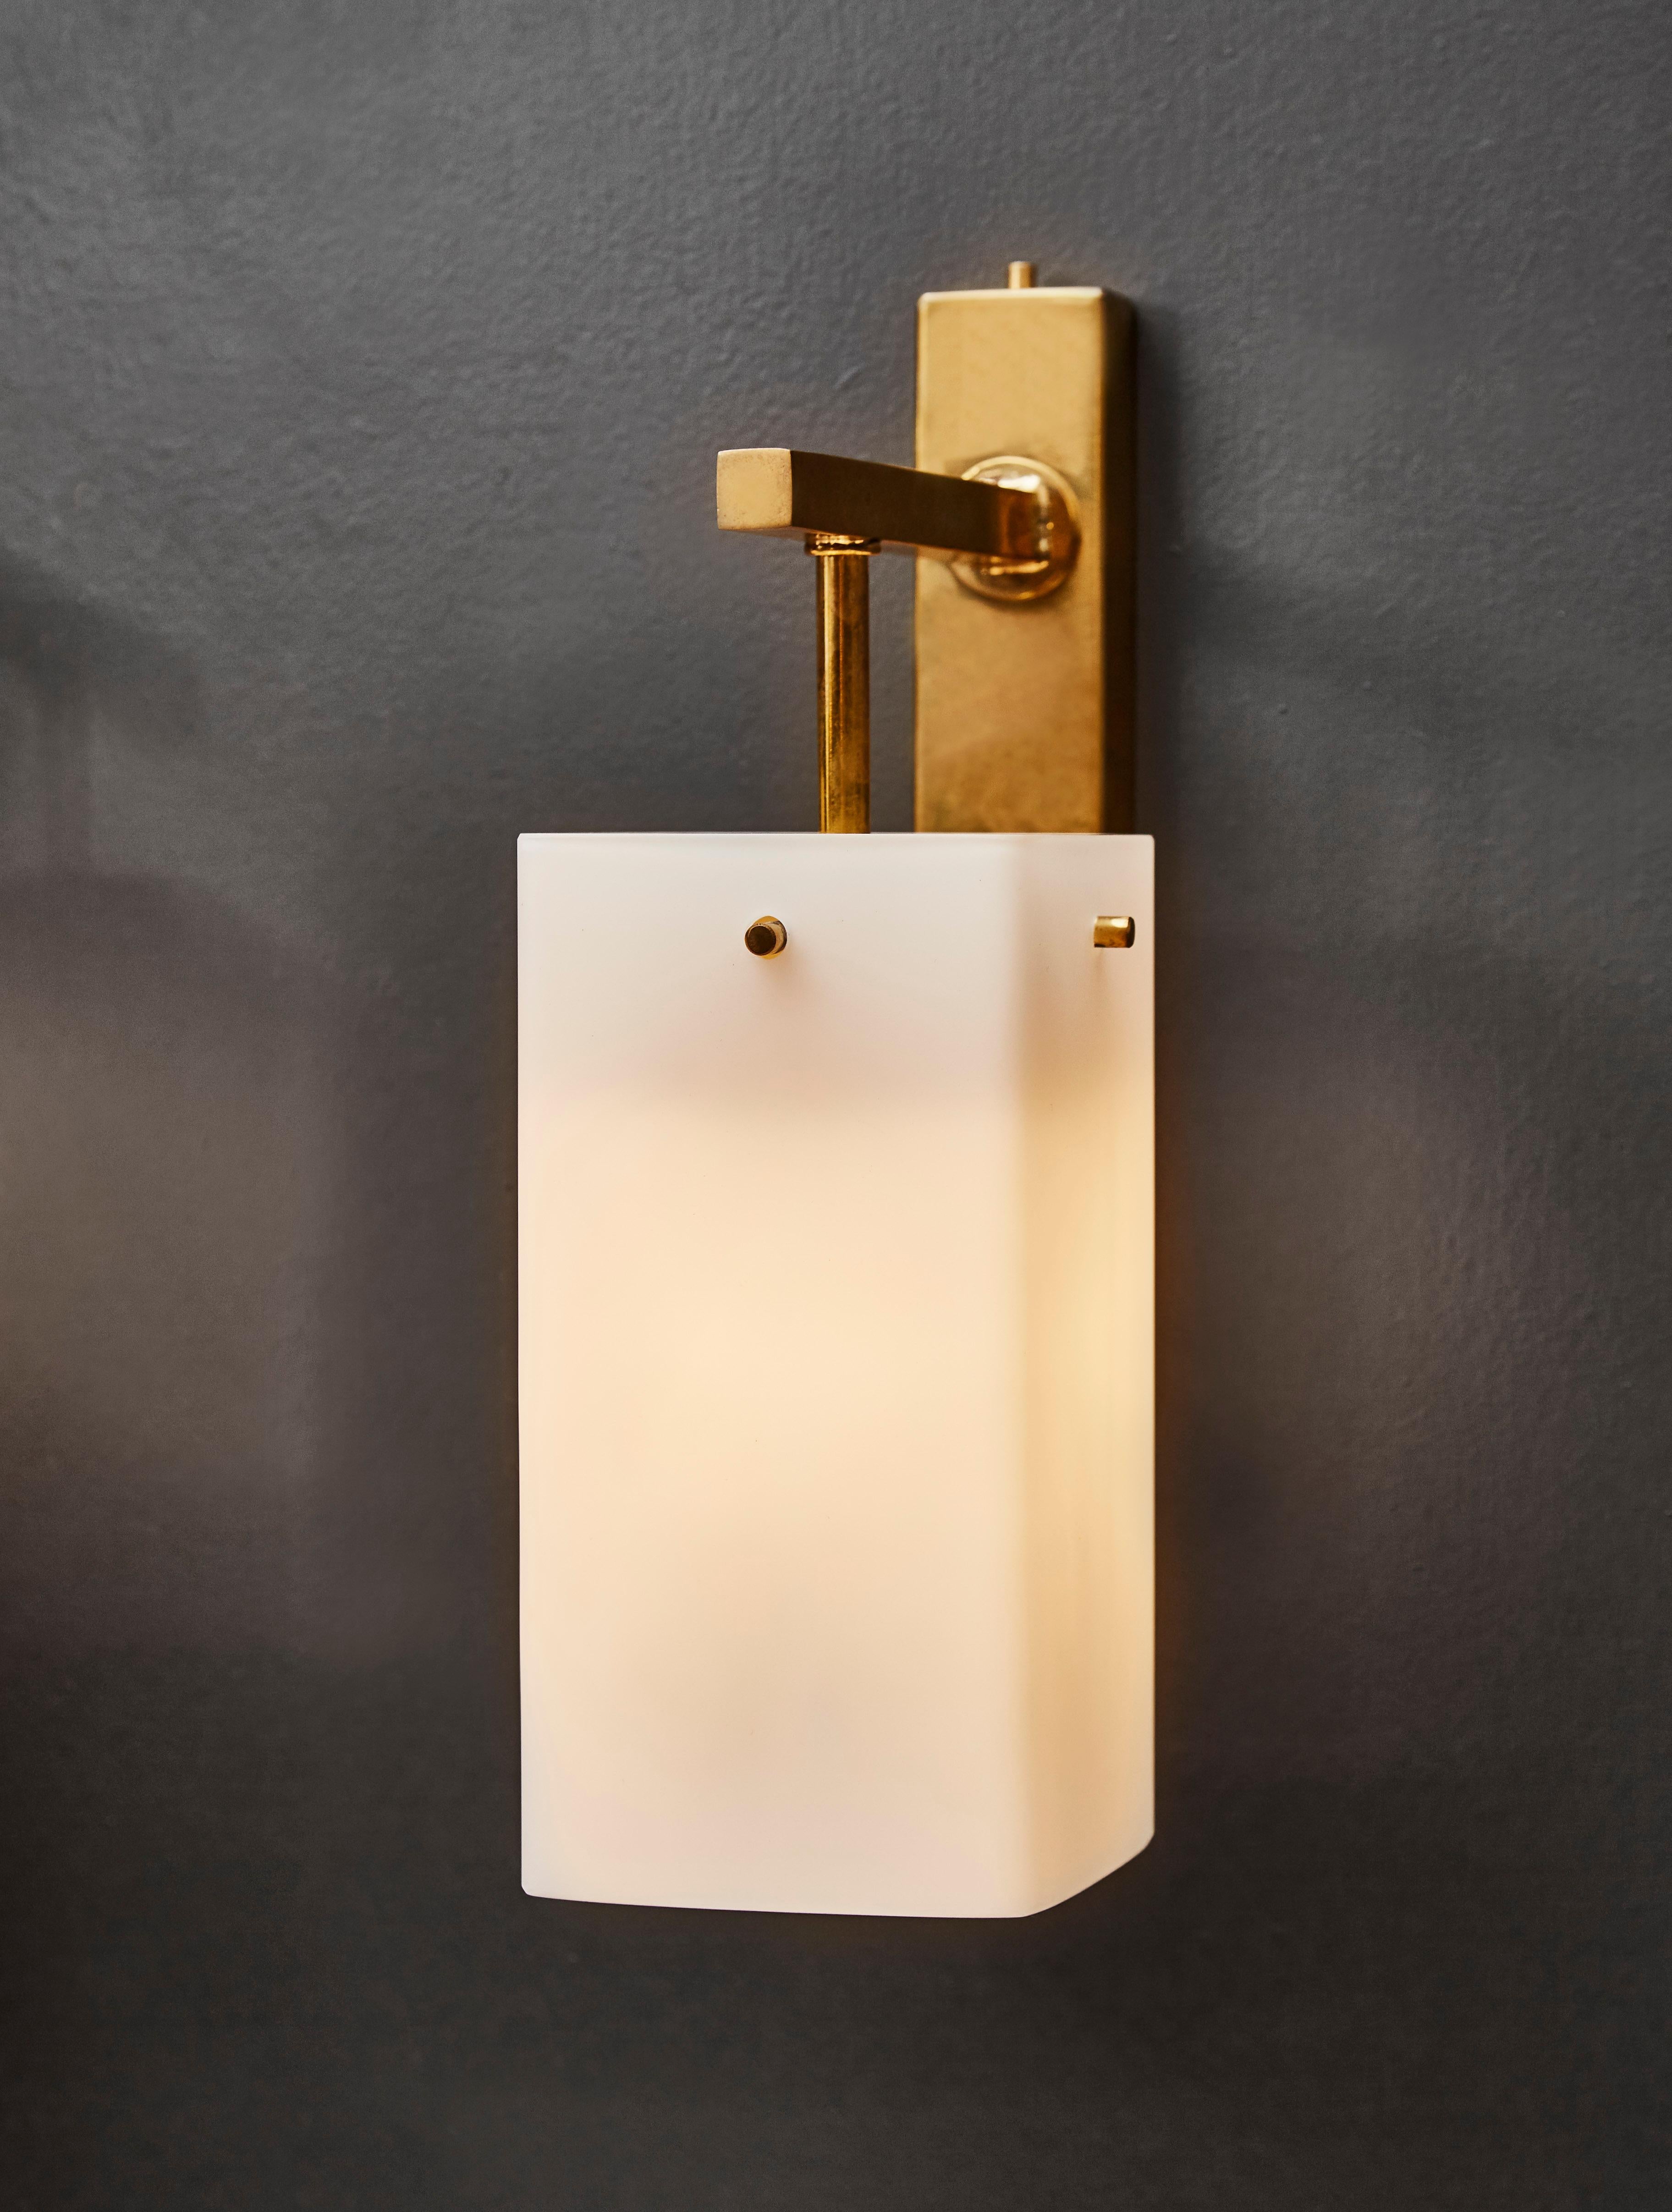 glass shades for wall sconces